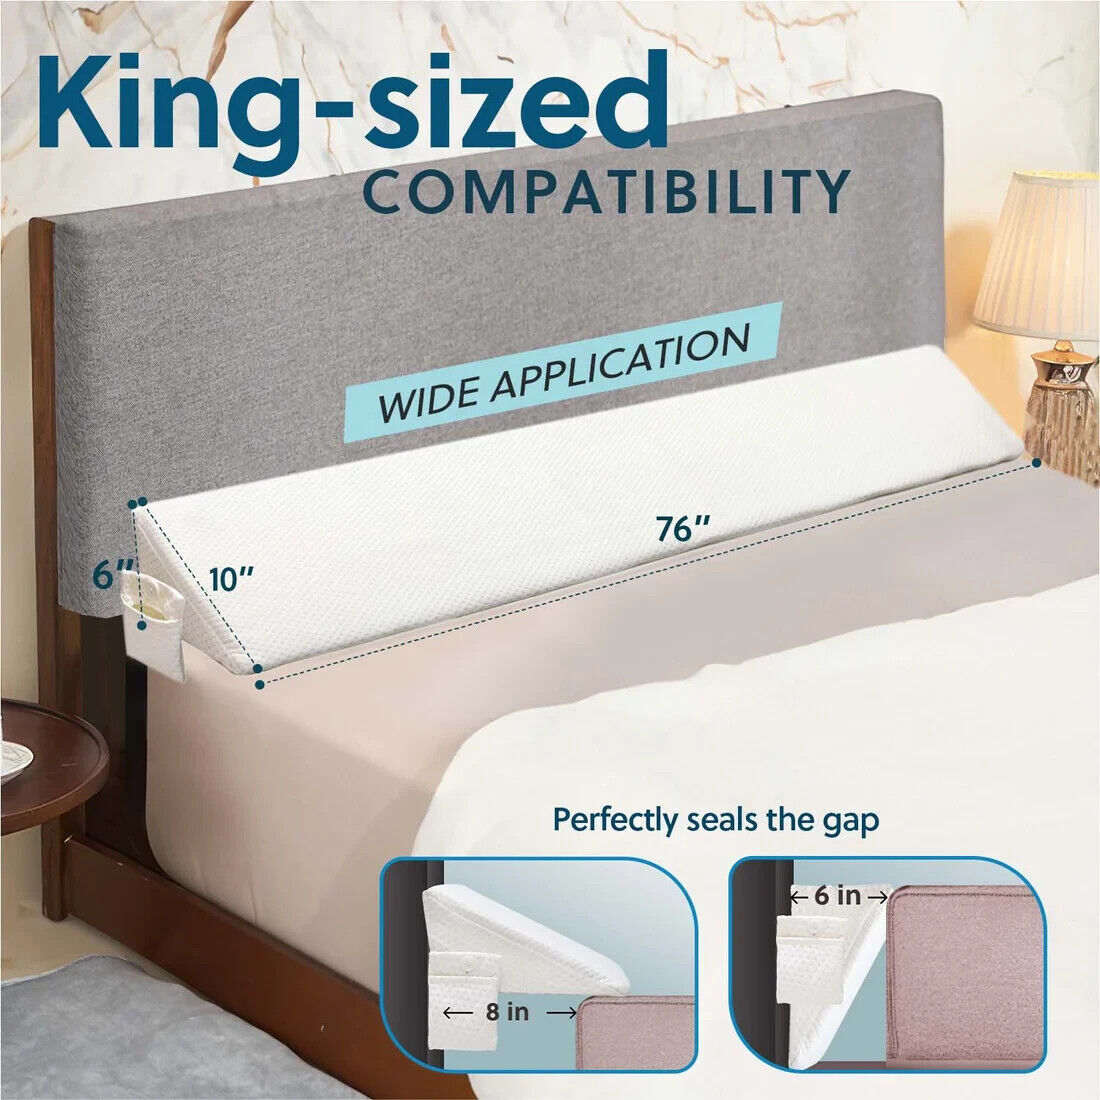 Sleep Jockey Pillow Wedge for Headboard Gap with Ultra Soft Cover - King and Queen Sized Headboard Pillow - Headboard Wedge Pillow, Bed Gap Filler for Headboard, Mattress Gap Filler for Peaceful Sleep